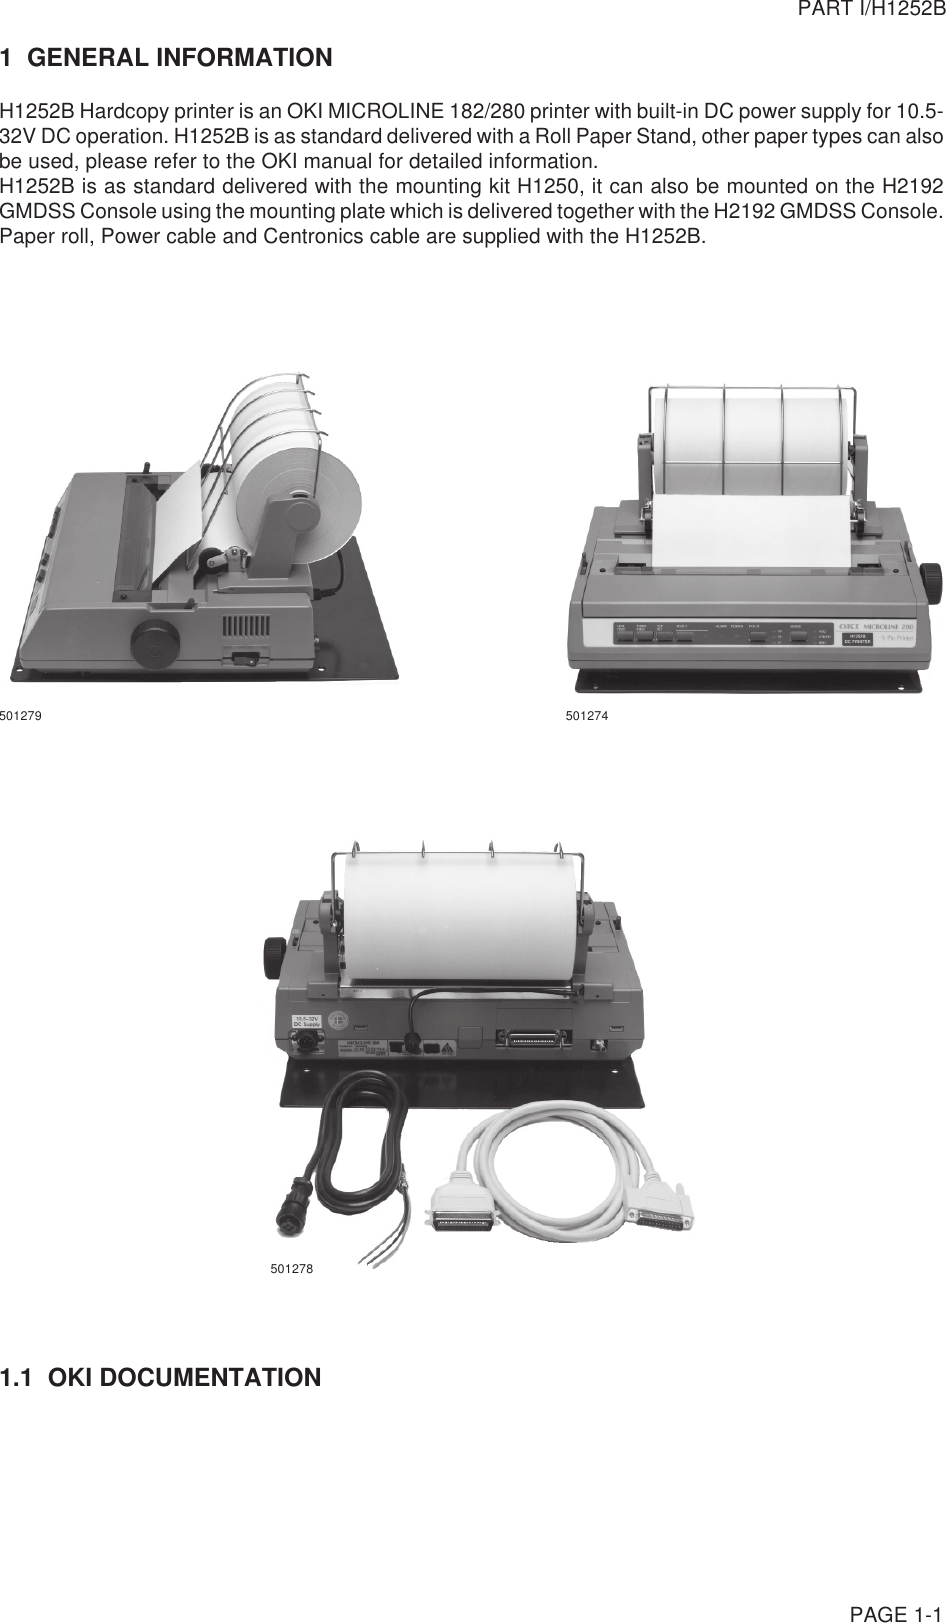 PAGE 1-11  GENERAL INFORMATIONH1252B Hardcopy printer is an OKI MICROLINE 182/280 printer with built-in DC power supply for 10.5-32V DC operation. H1252B is as standard delivered with a Roll Paper Stand, other paper types can alsobe used, please refer to the OKI manual for detailed information.H1252B is as standard delivered with the mounting kit H1250, it can also be mounted on the H2192GMDSS Console using the mounting plate which is delivered together with the H2192 GMDSS Console.Paper roll, Power cable and Centronics cable are supplied with the H1252B.501279 5012741.1  OKI DOCUMENTATIONPART I/H1252B501278